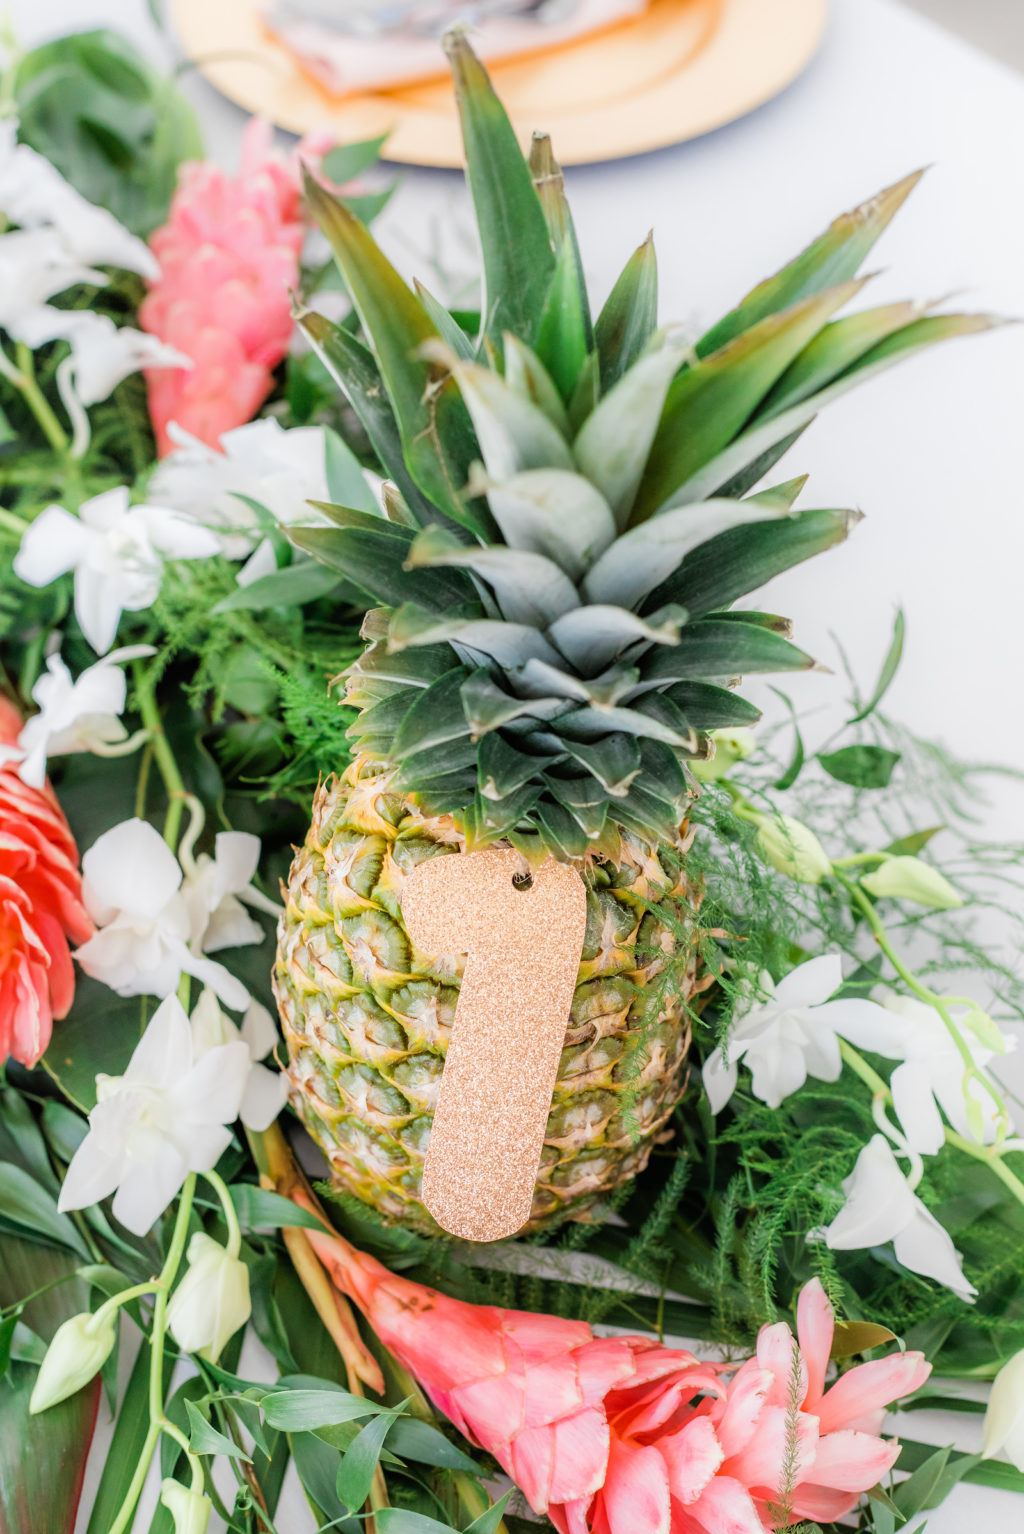 Elegant Tropical Wedding Reception Decor, Pineapple with Gold Table Number Cutout, Pink Ginger, Palm Fronds, White Orchids Floral Centerpiece | Tampa Bay Wedding Florist Iza's Flowers